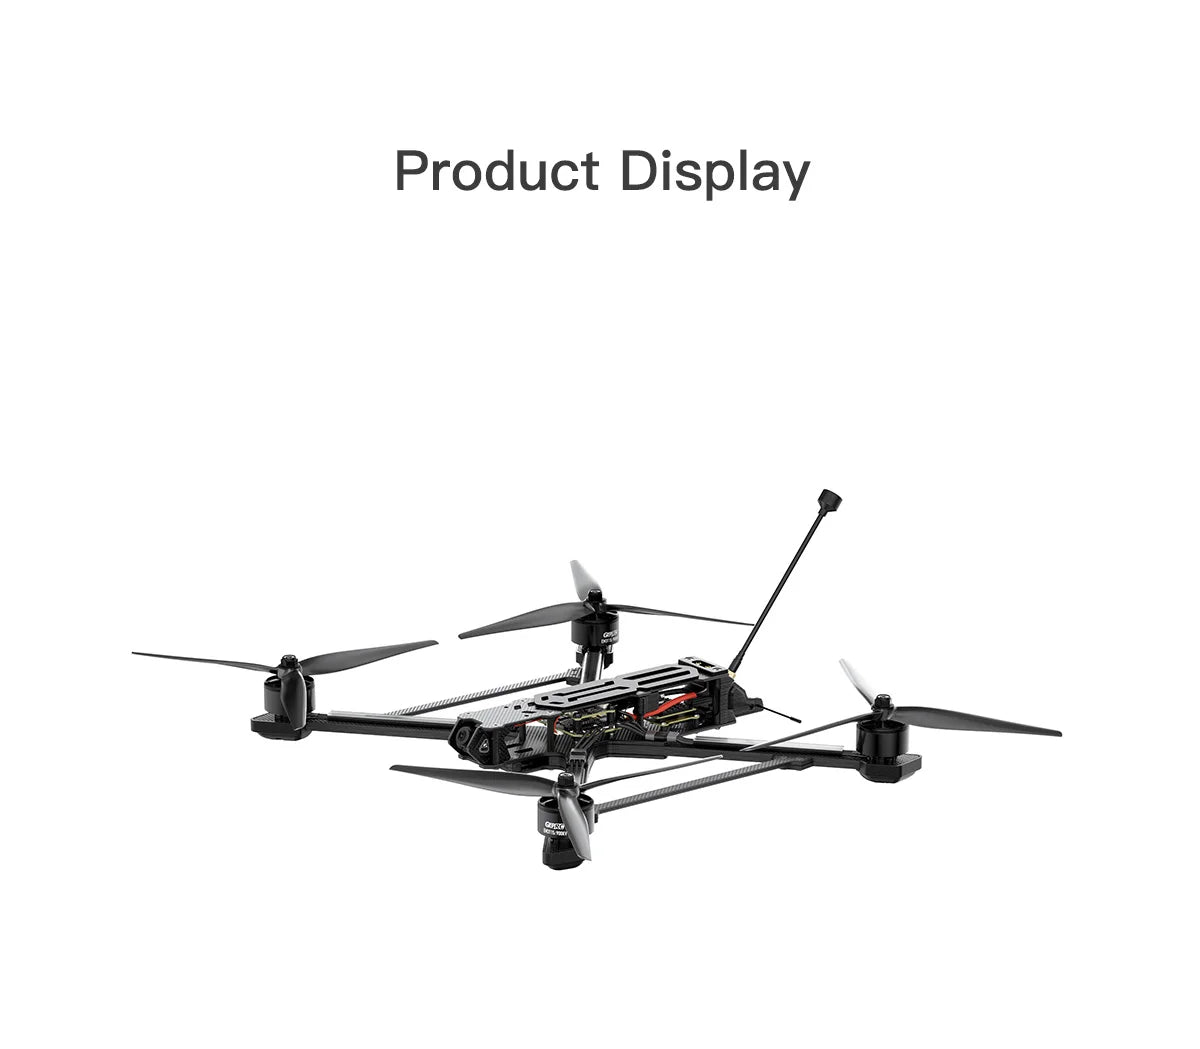 GEPRC EF10 1.2G 2W Long Range 10inch FPV, in mining areas or closeto radio transmission towers,high-voltage wires,sub